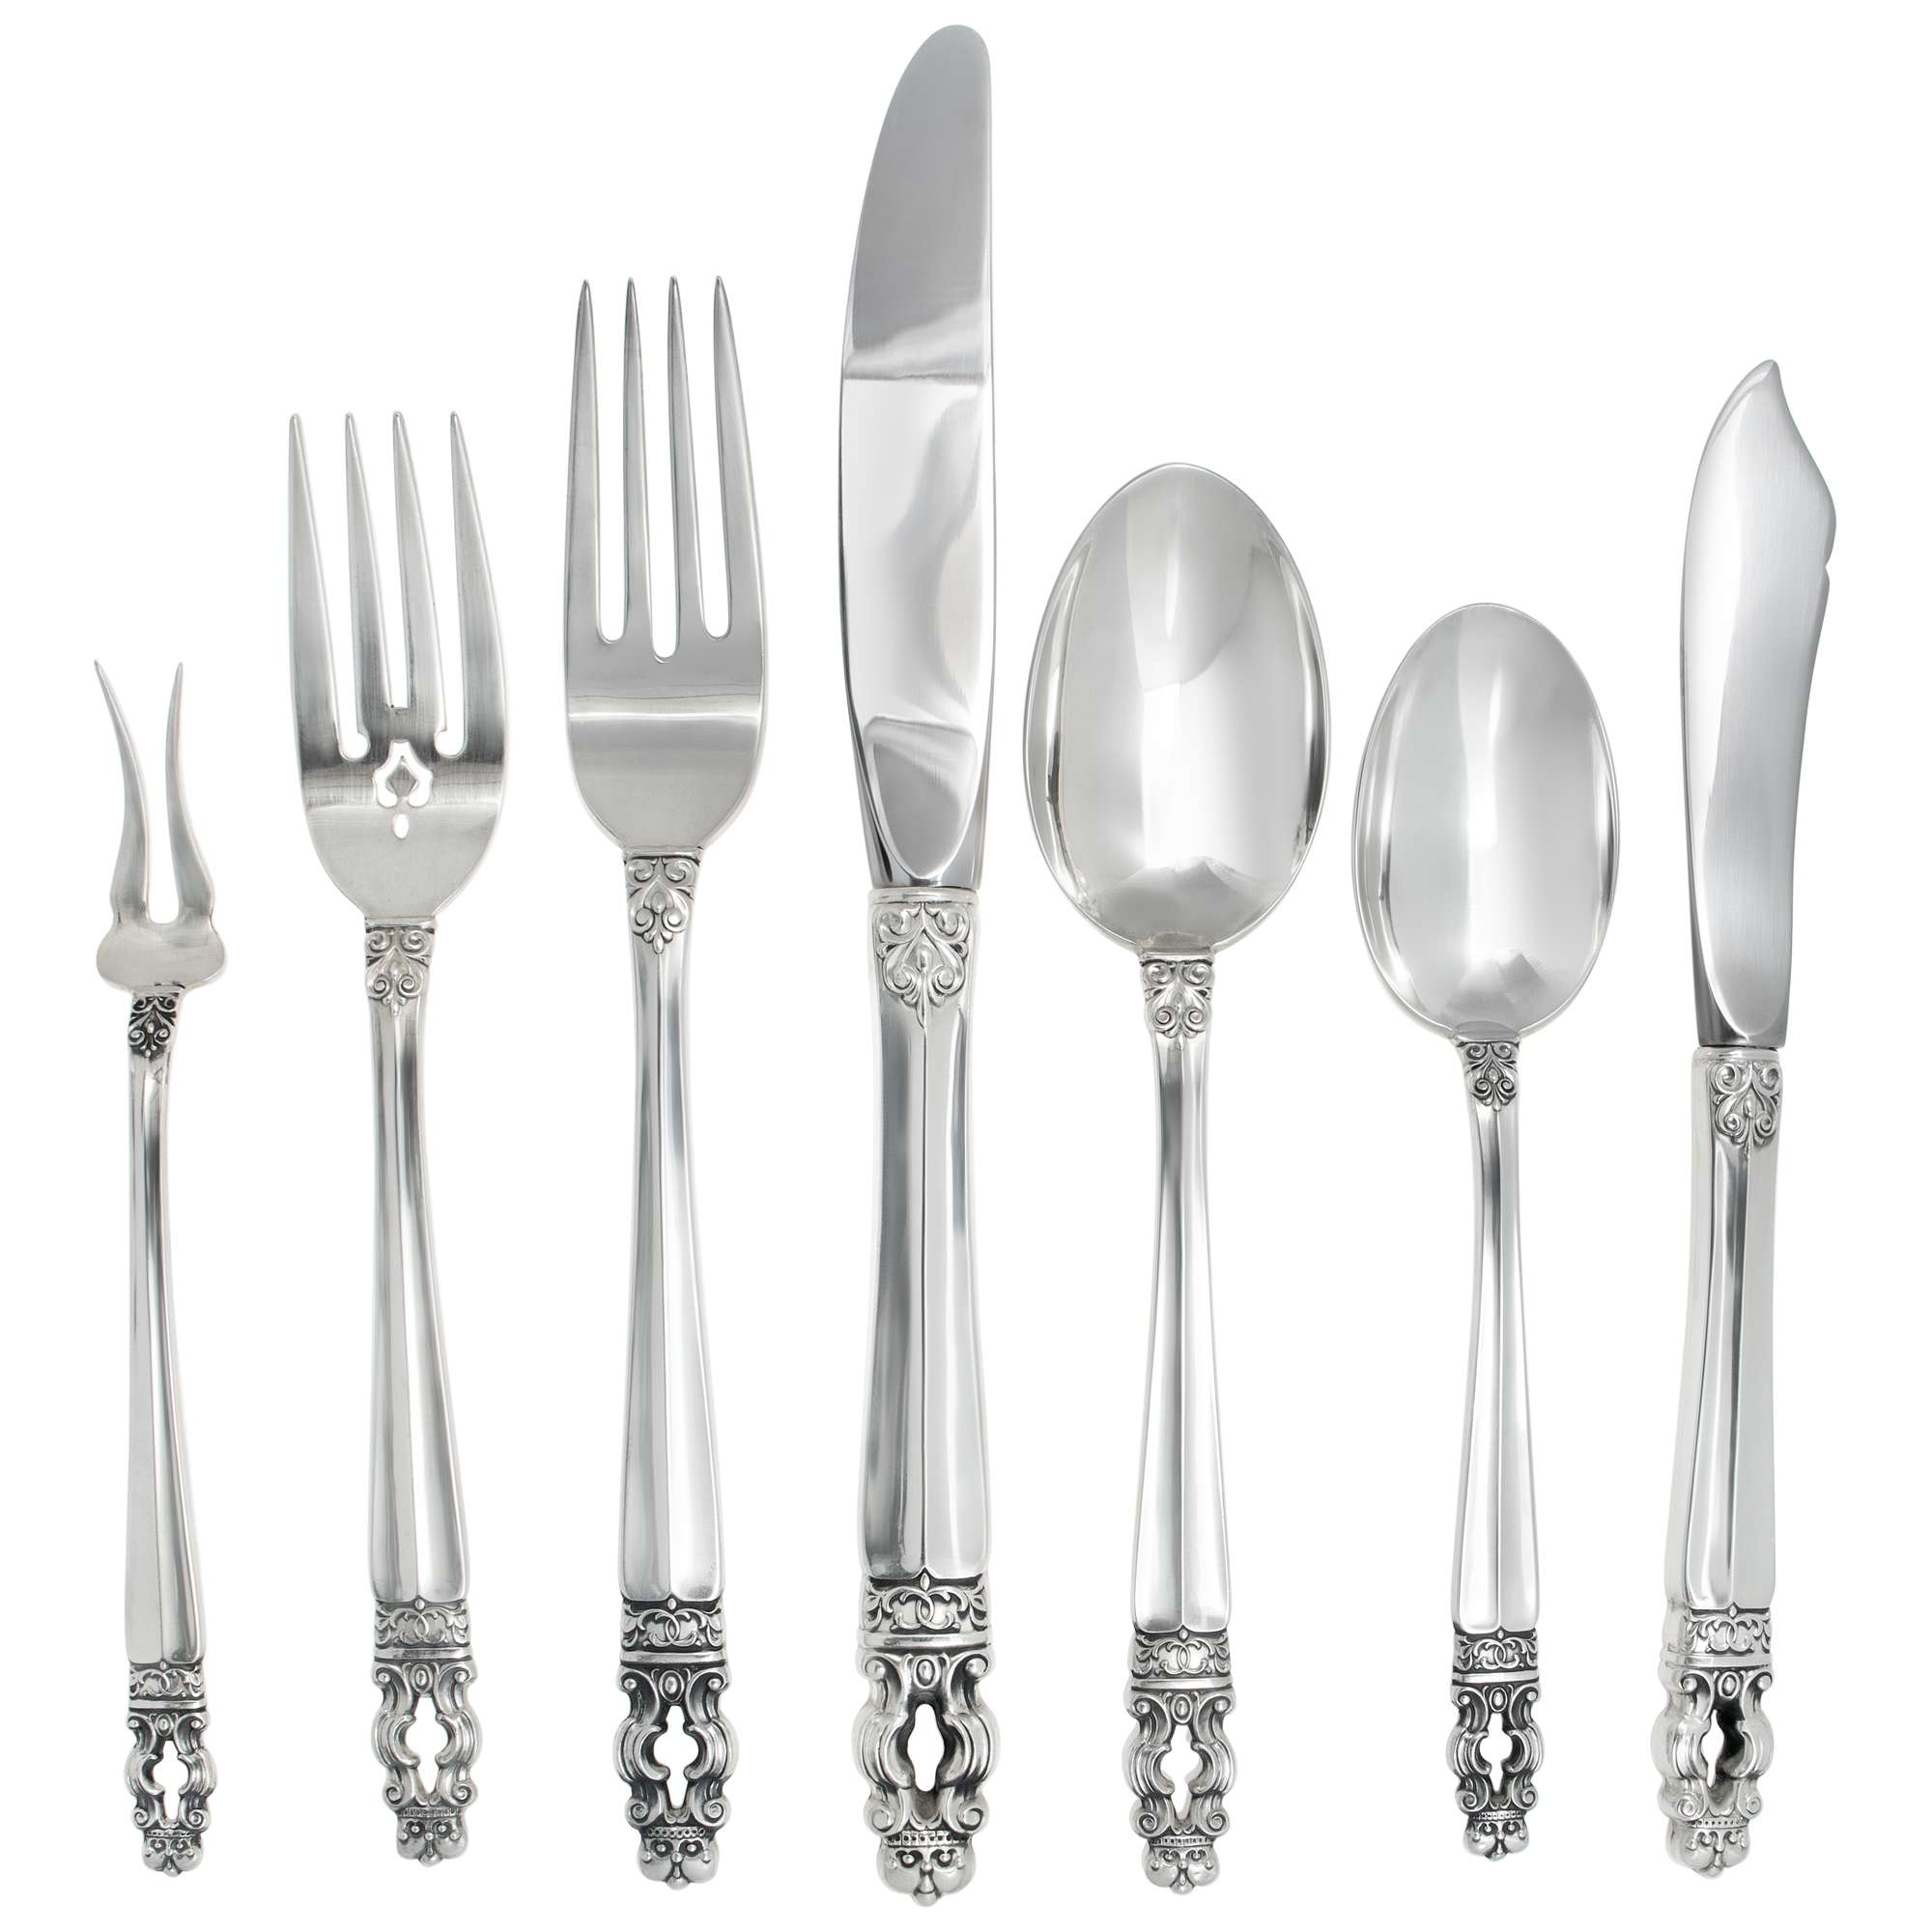 SOVEREIGN HISPANIA , patented in 1968 by Gorham- 5 Place setting for 8 with 5 serving pieces. 45 Pieces total.